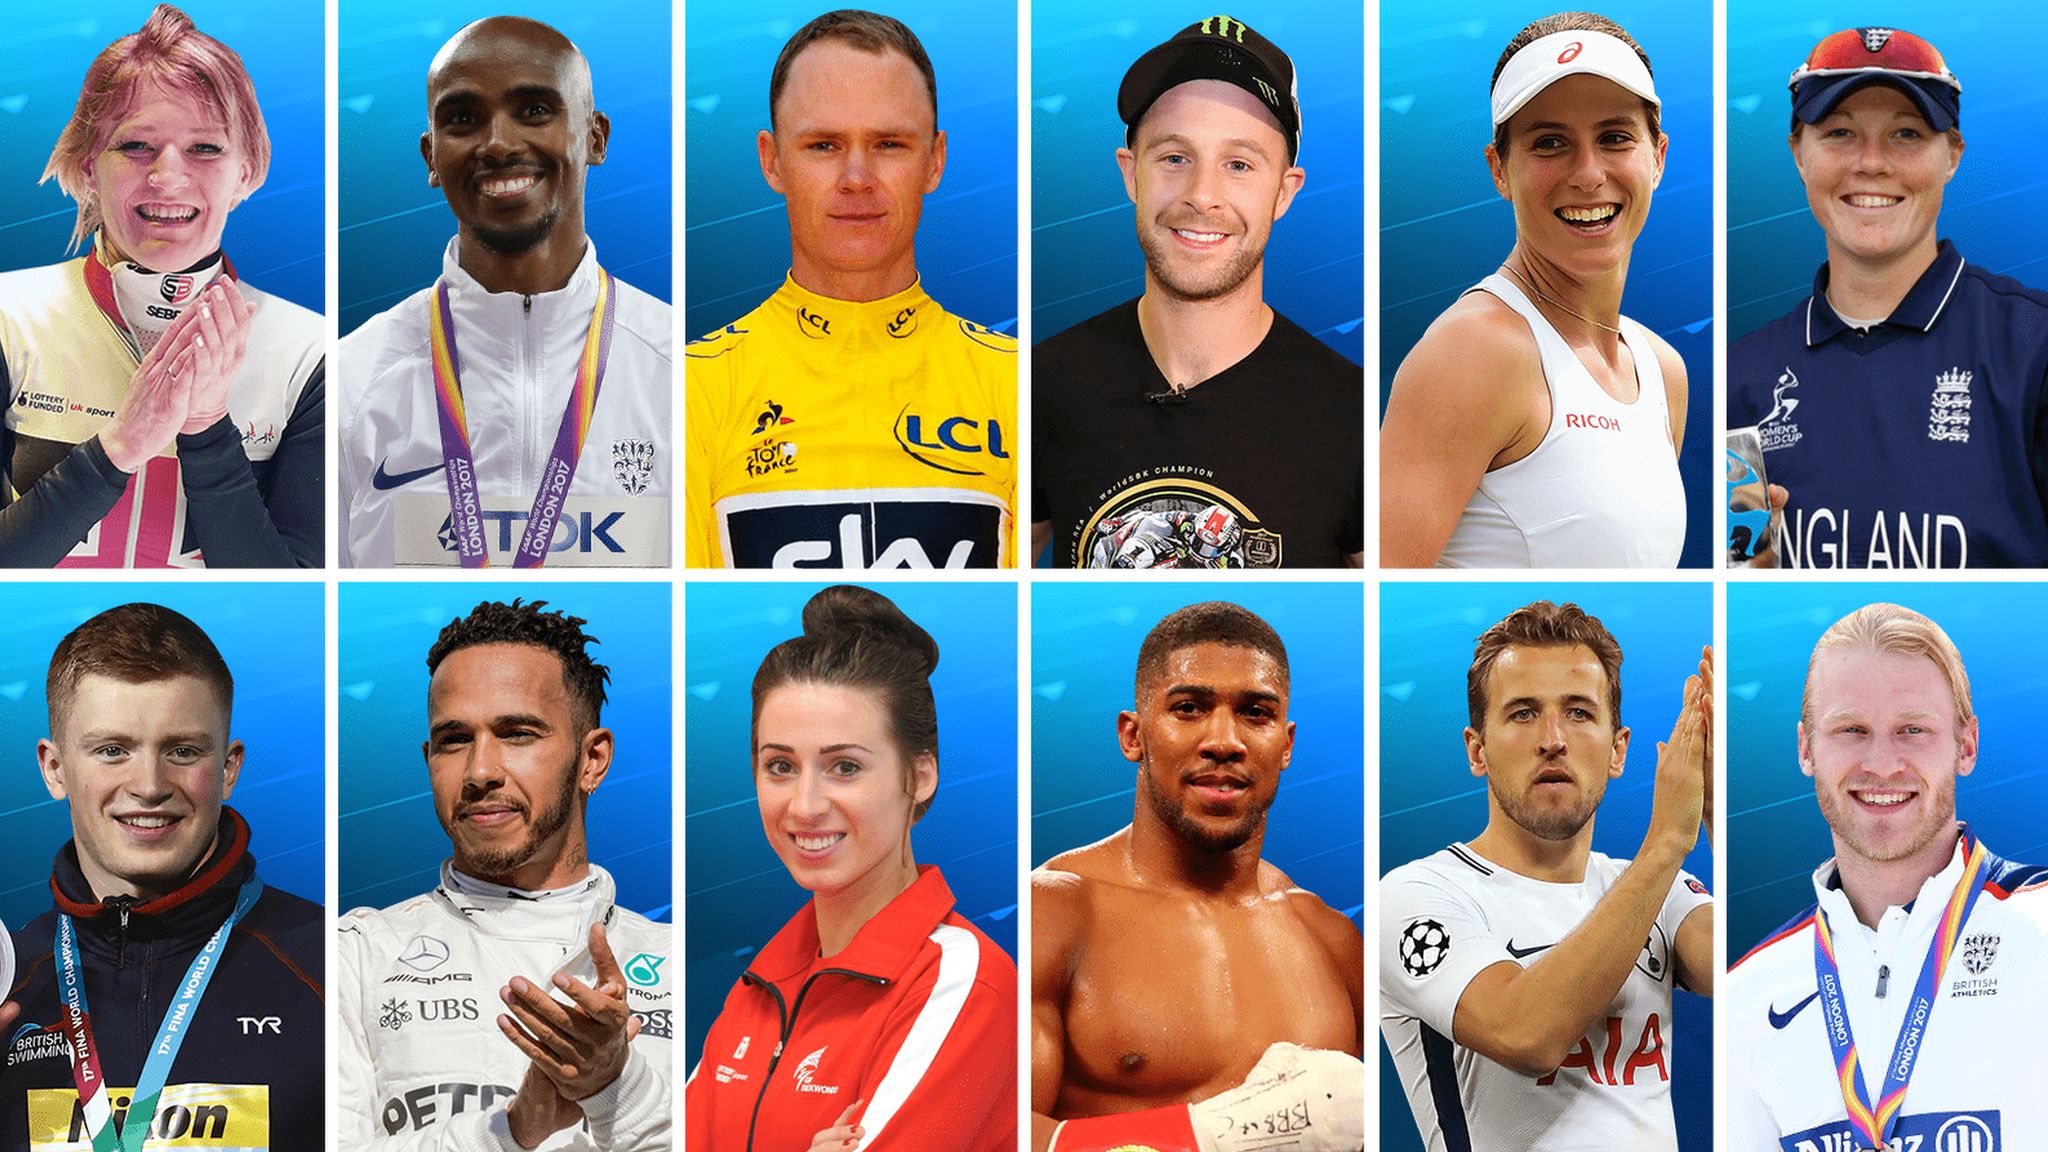 BBC Sports Personality of the Year 2017 contenders